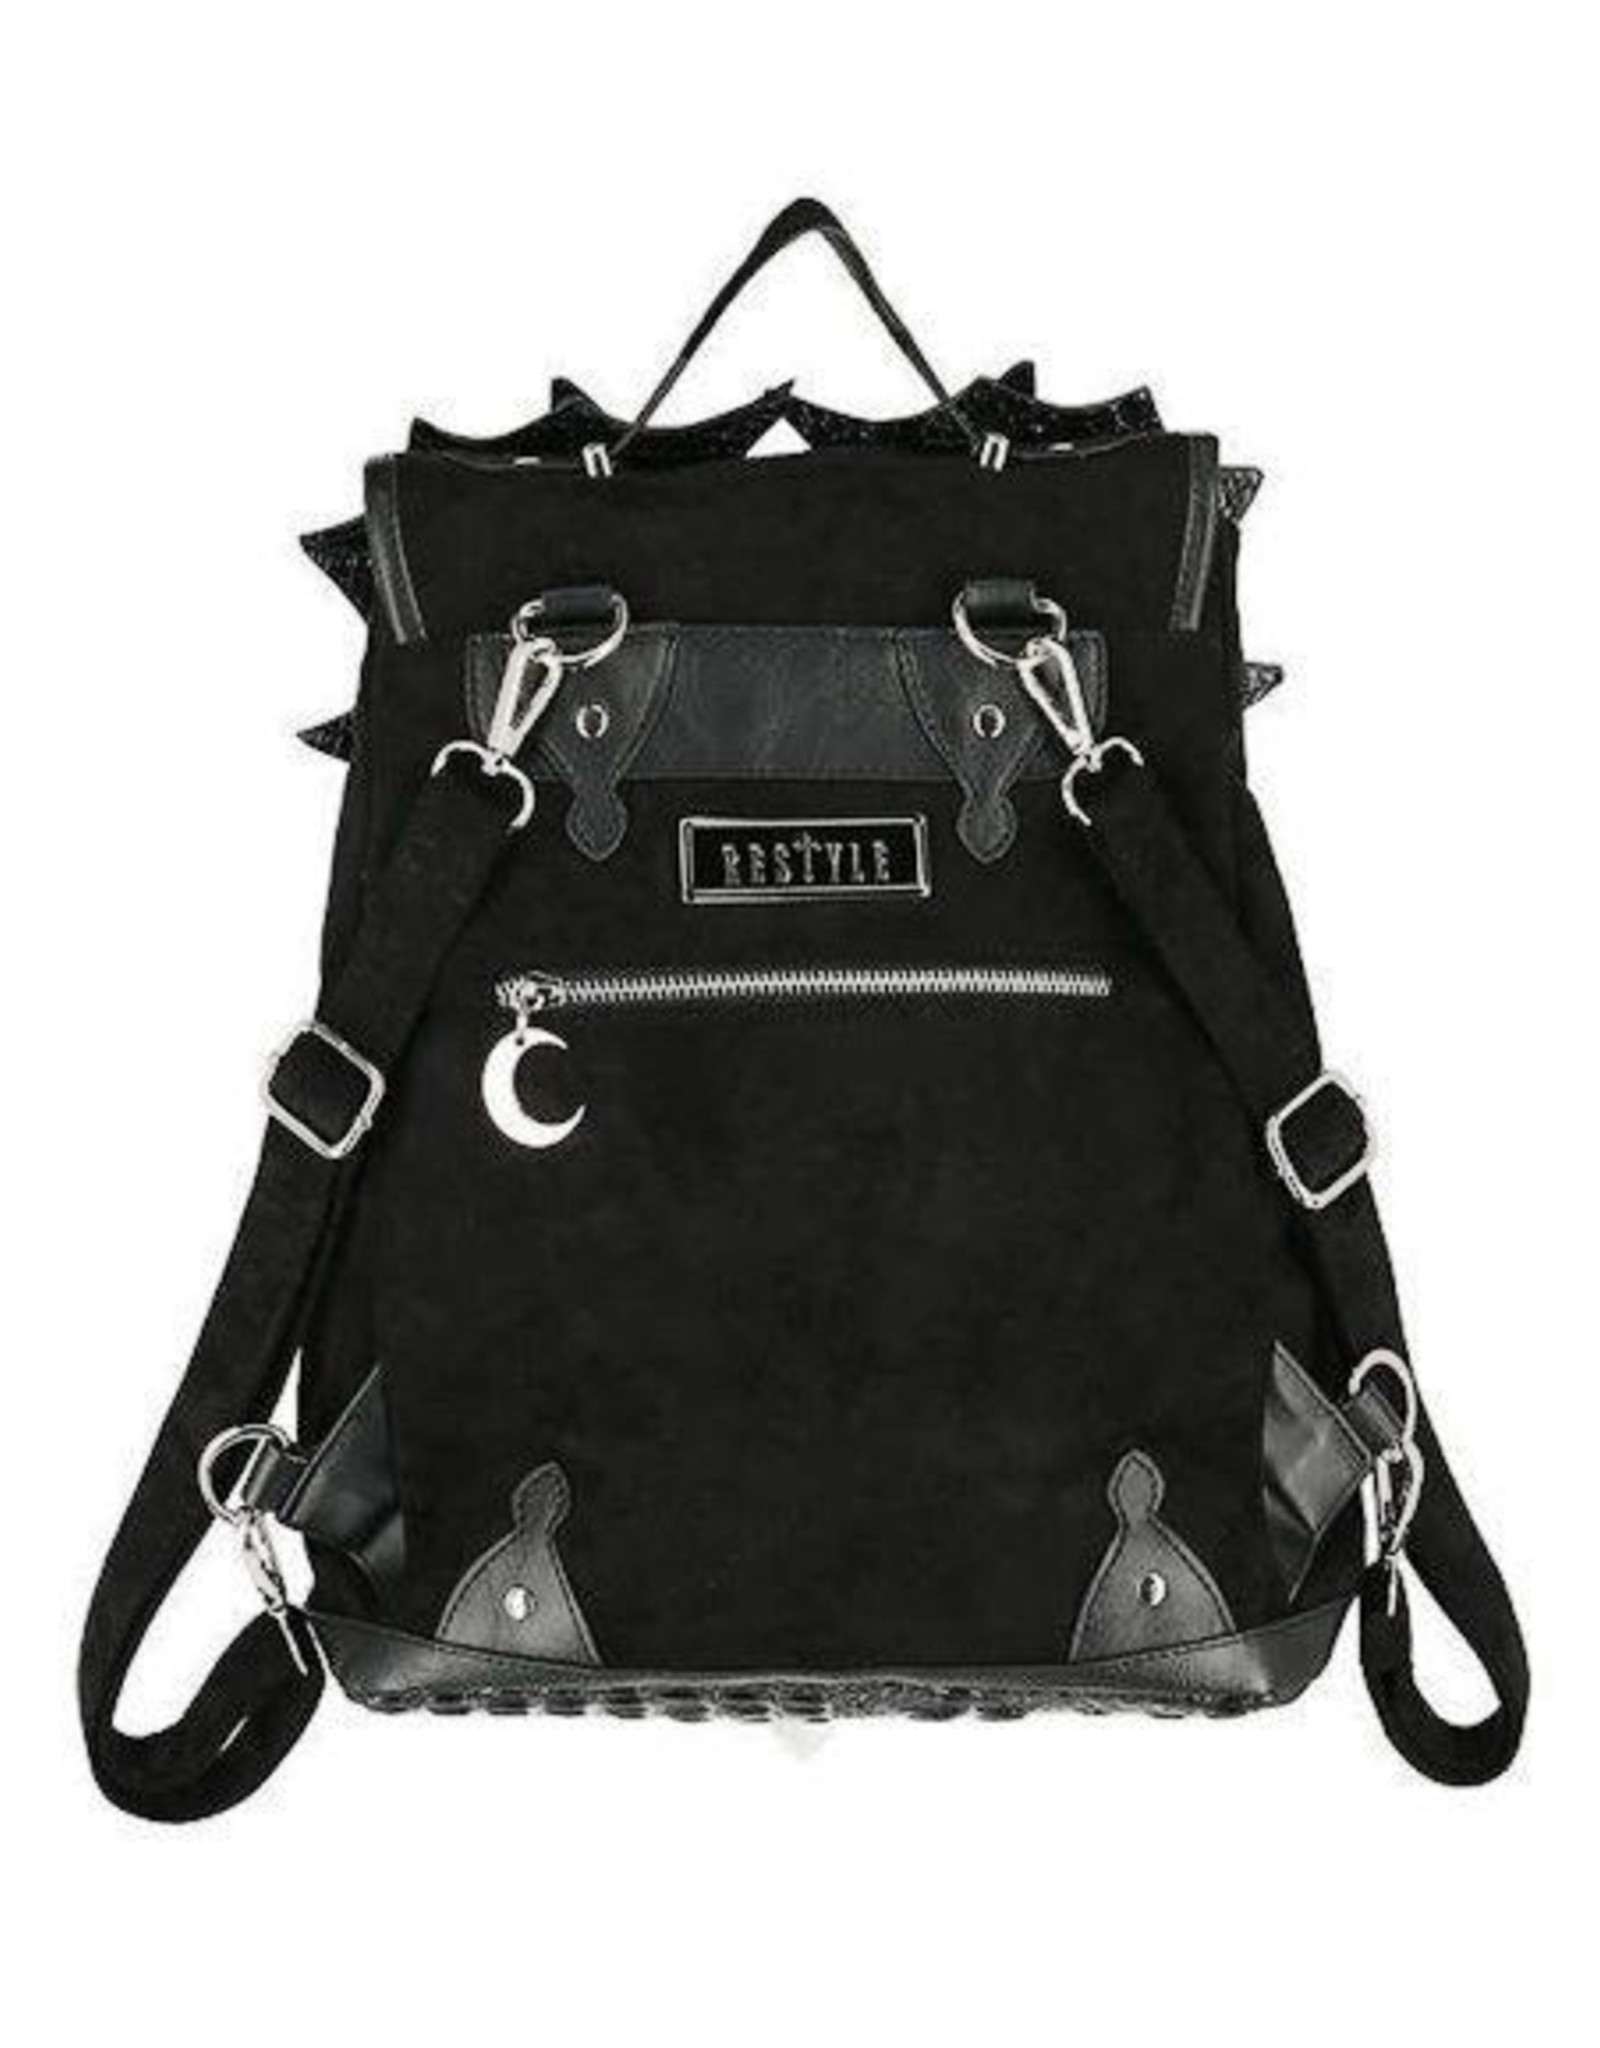 Restyle Gothic bags Steampunk bags -  Black Phantom Gothic Backpack with a Dragon Wings - Restyle